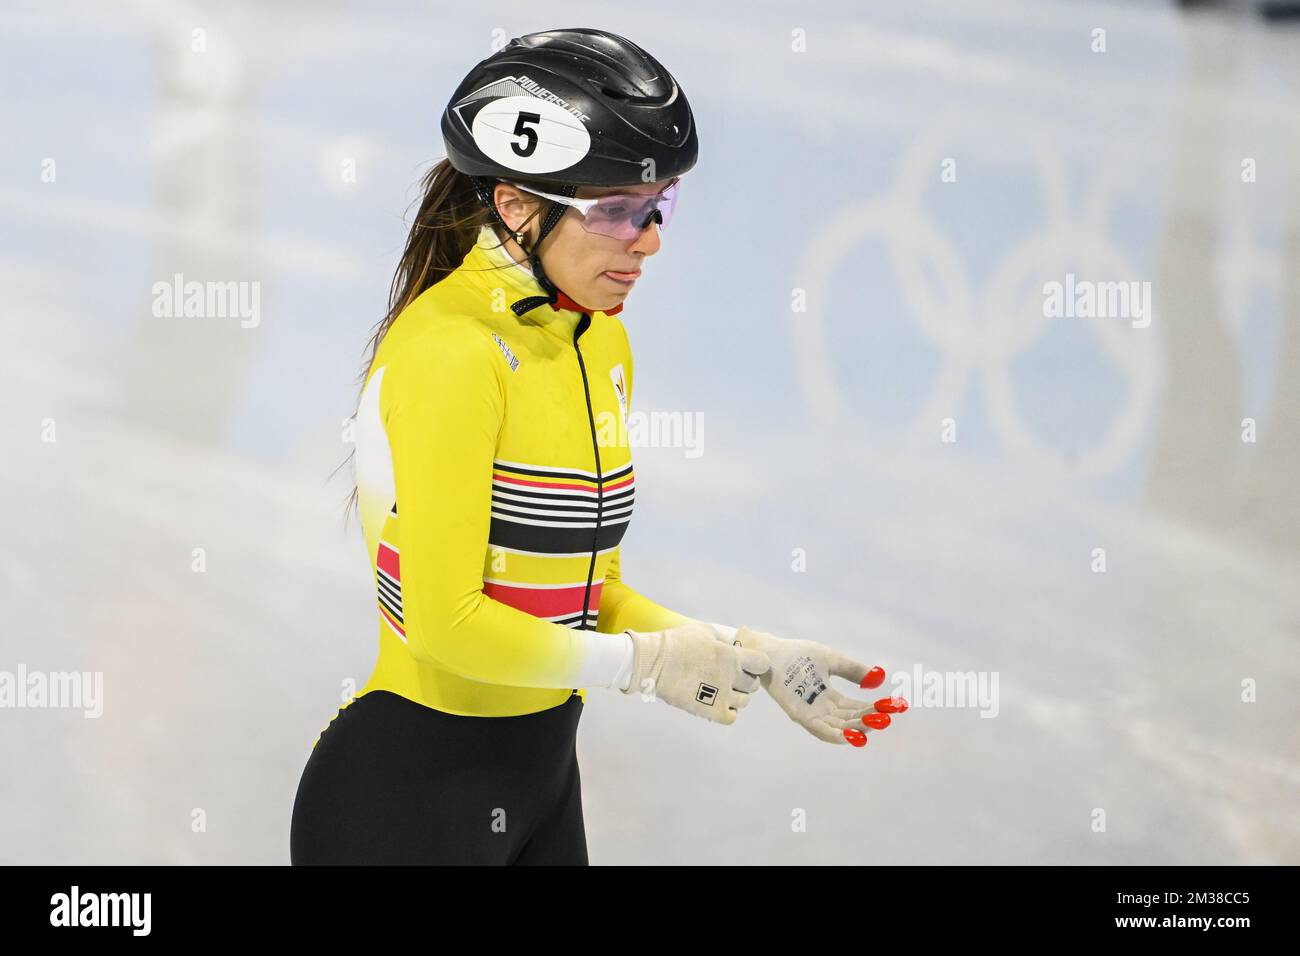 Belgian shorttrack skater Hanne Desmet looks dejected after the women's Shorttrack 1500m A-final at the Beijing 2022 Winter Olympics in Beijing, China, Wednesday 16 February 2022. The winter Olympics are taking place from 4 February to 20 February 2022. BELGA PHOTO LAURIE DIEFFEMBACQ Stock Photo